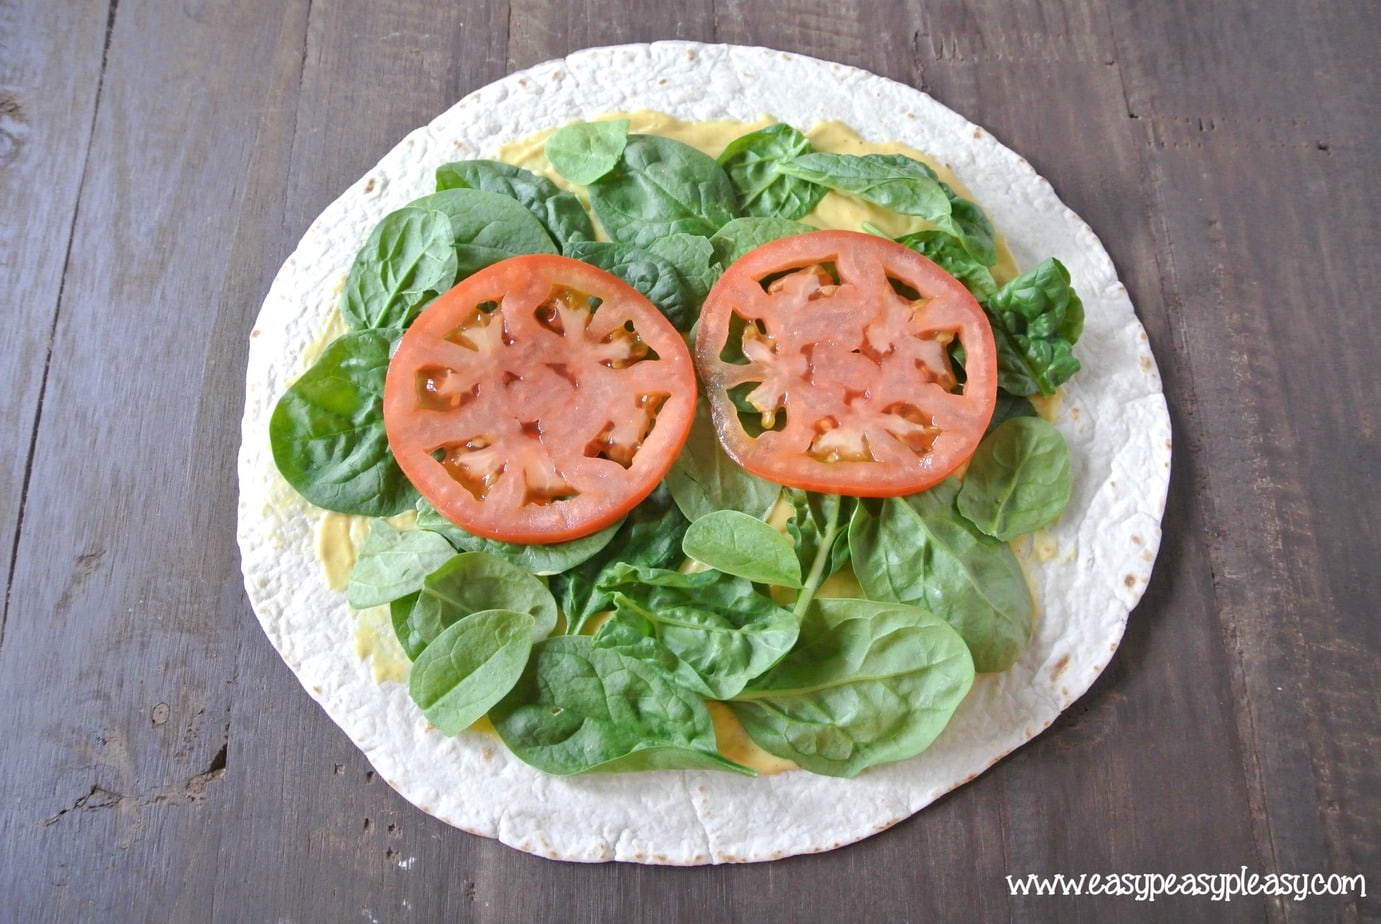 How to make a picture perfect wrap. Add all the veggies!